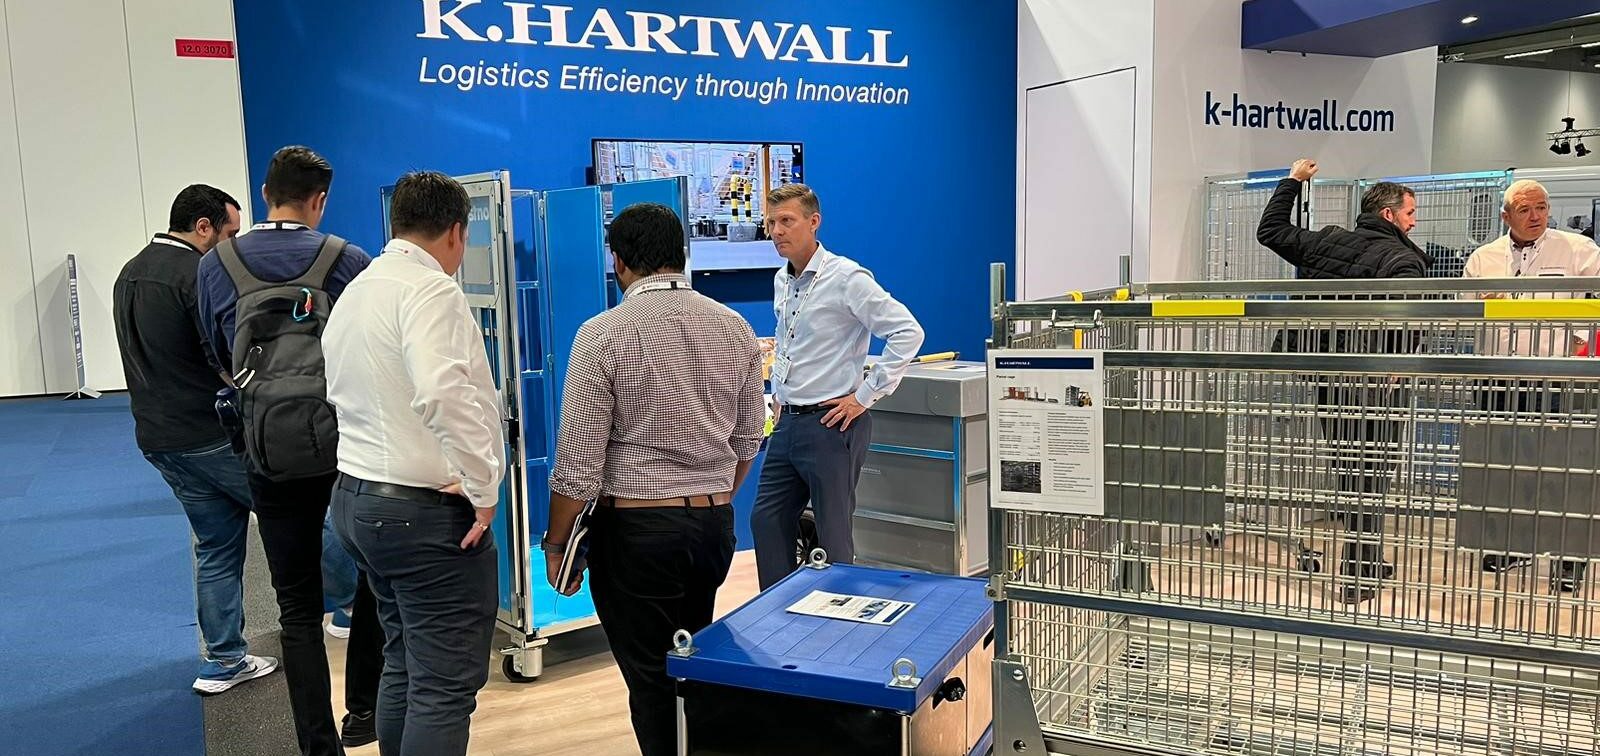 K.Hartwall booth at Parcel + Post Expo 2022